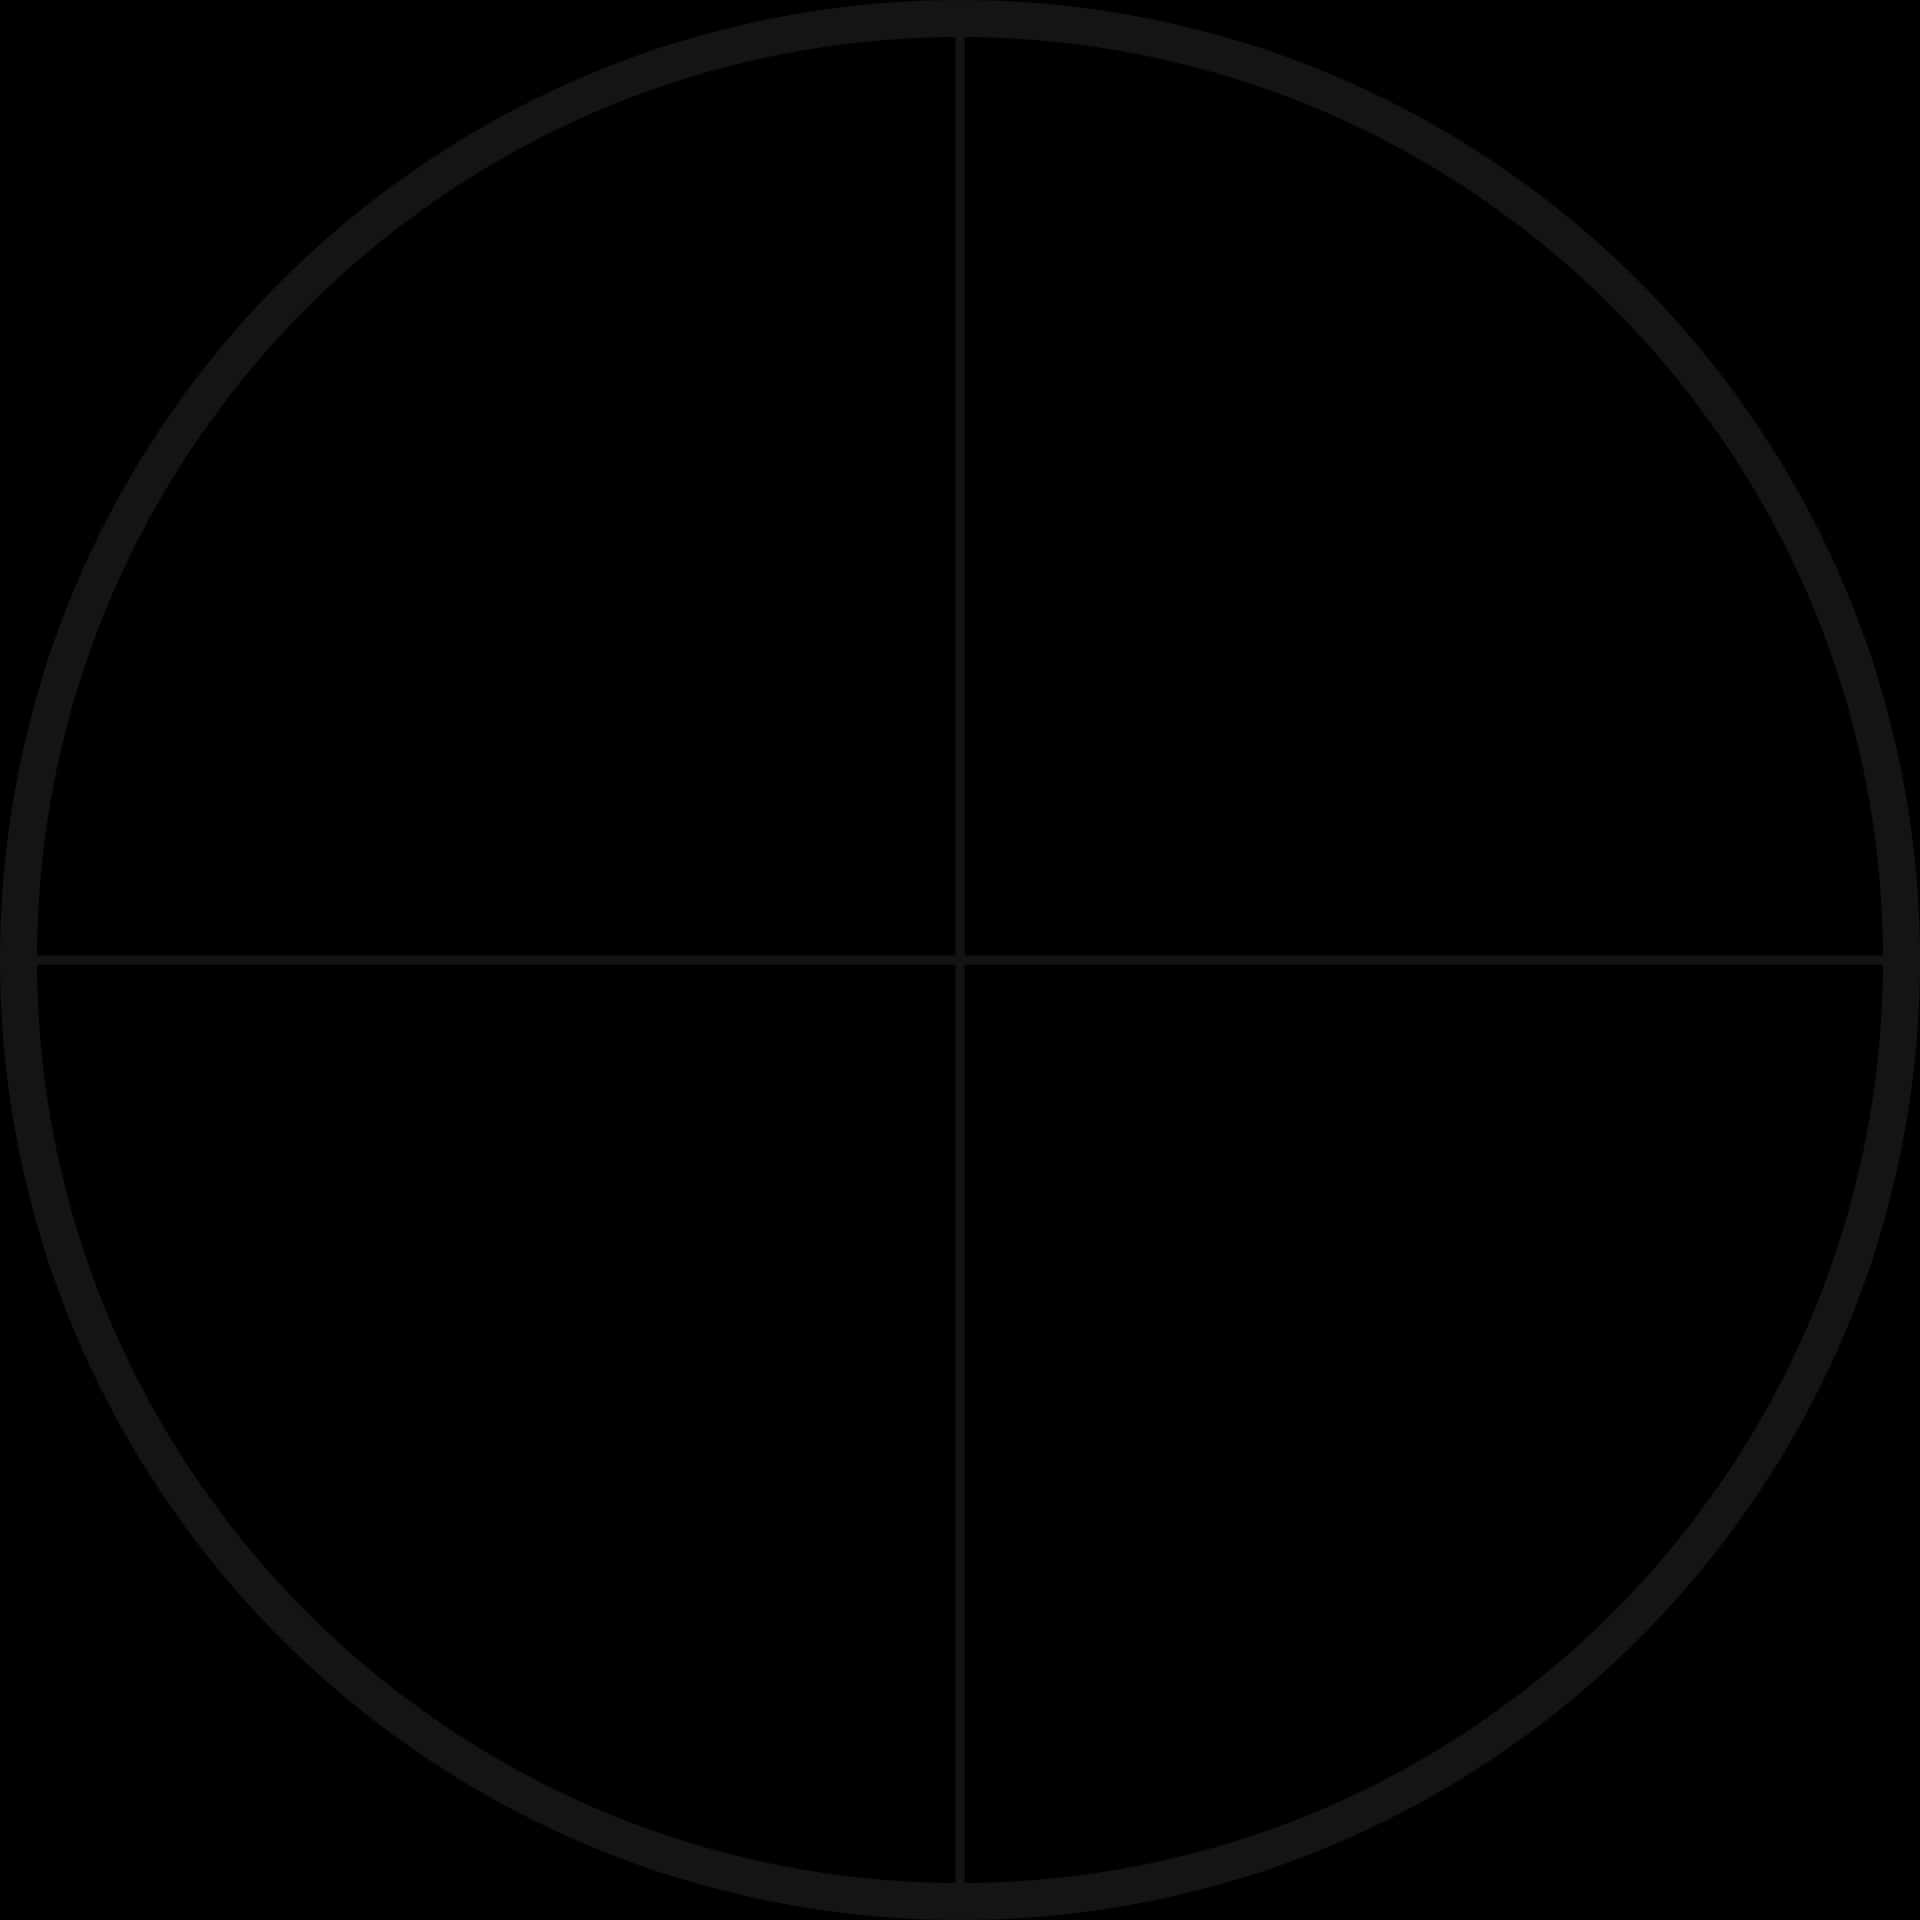 Sniper Scope Crosshair Graphic PNG